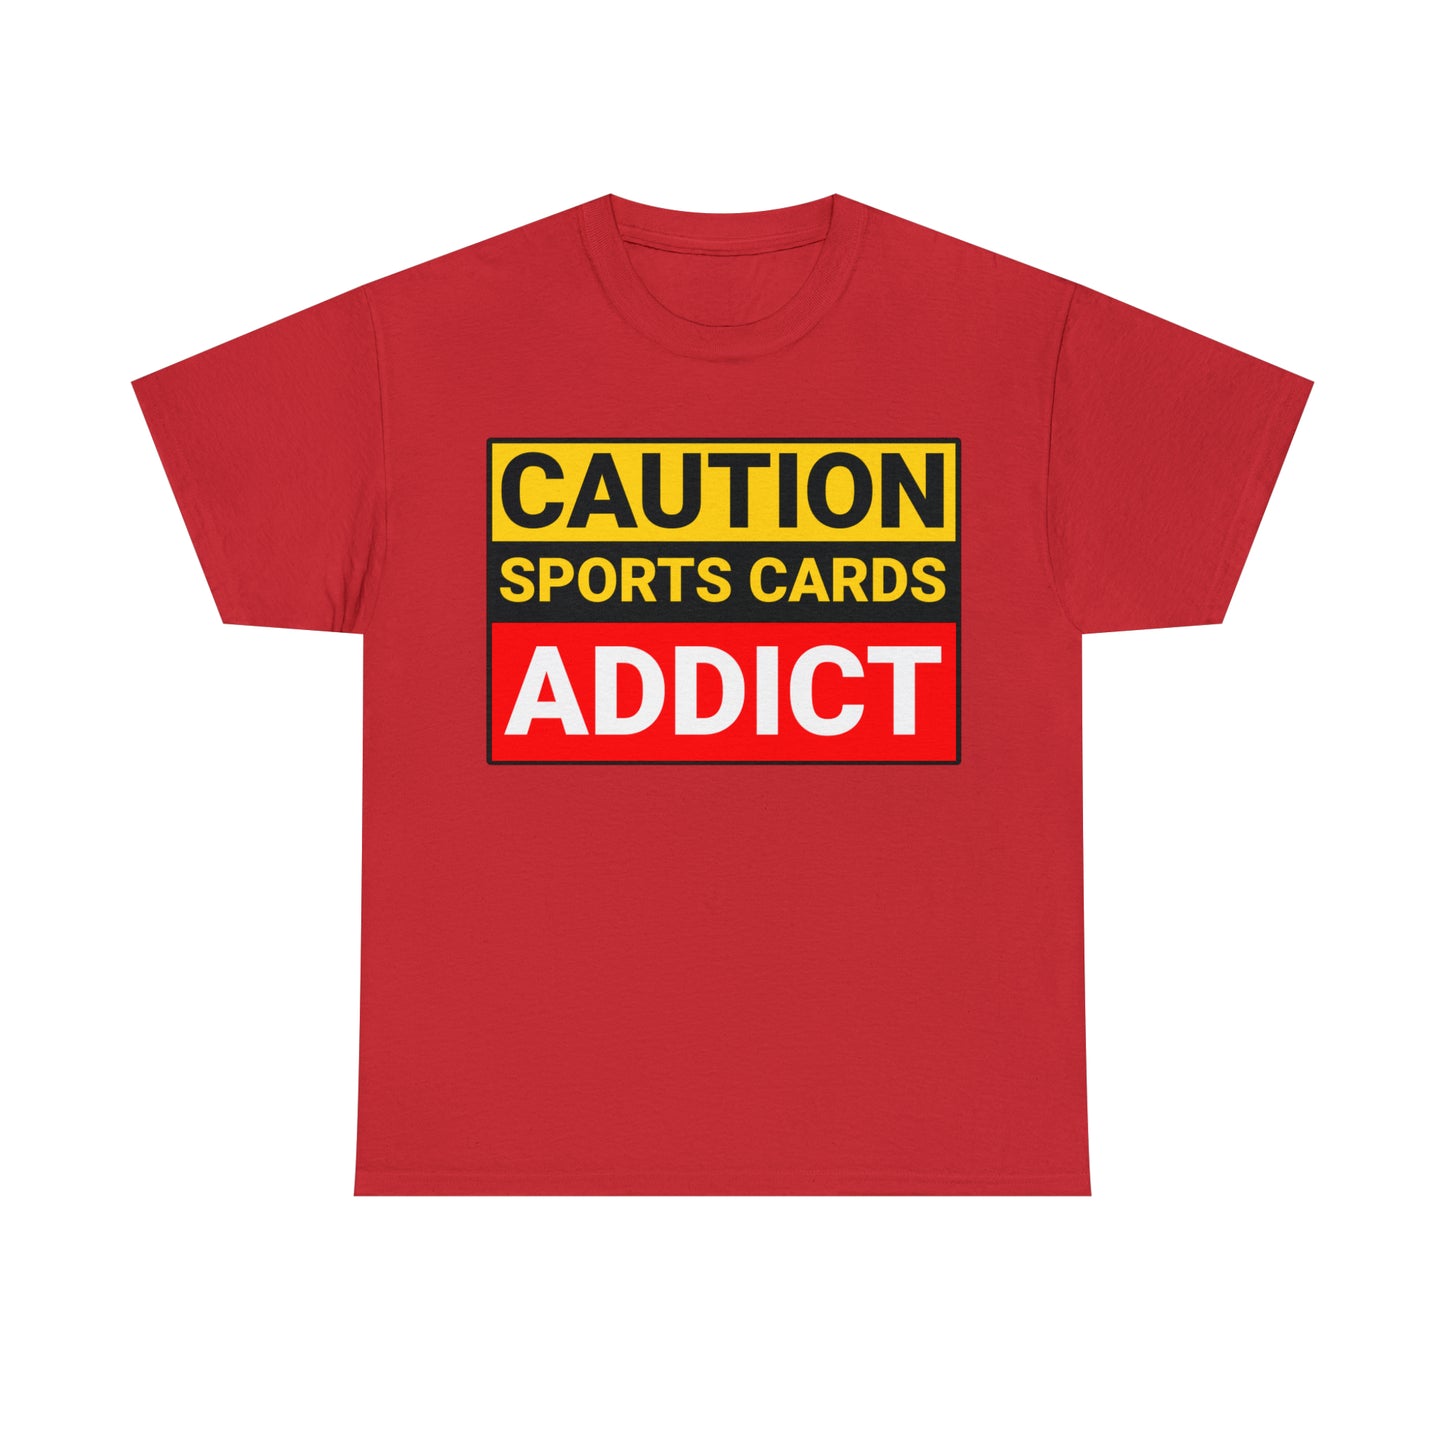 "Caution Sports Cards Addict" - Unisex Heavy Cotton Tee | Collector's Enthusiast Apparel